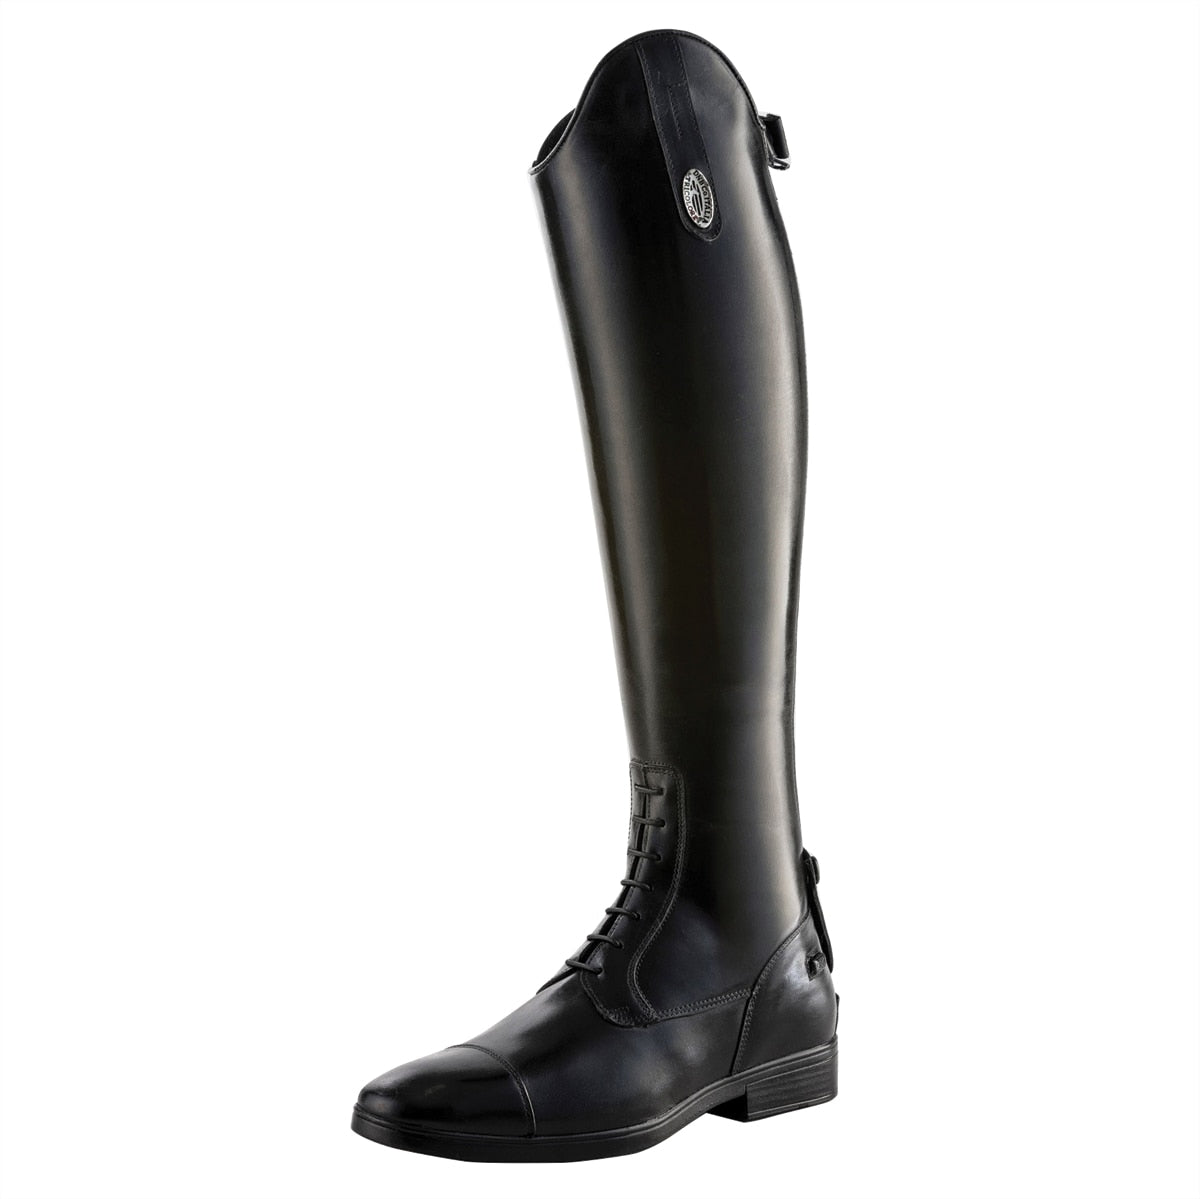 TriColore by DeNiro Amabile Field Boot Smooth Leather, Corta (Short) Height